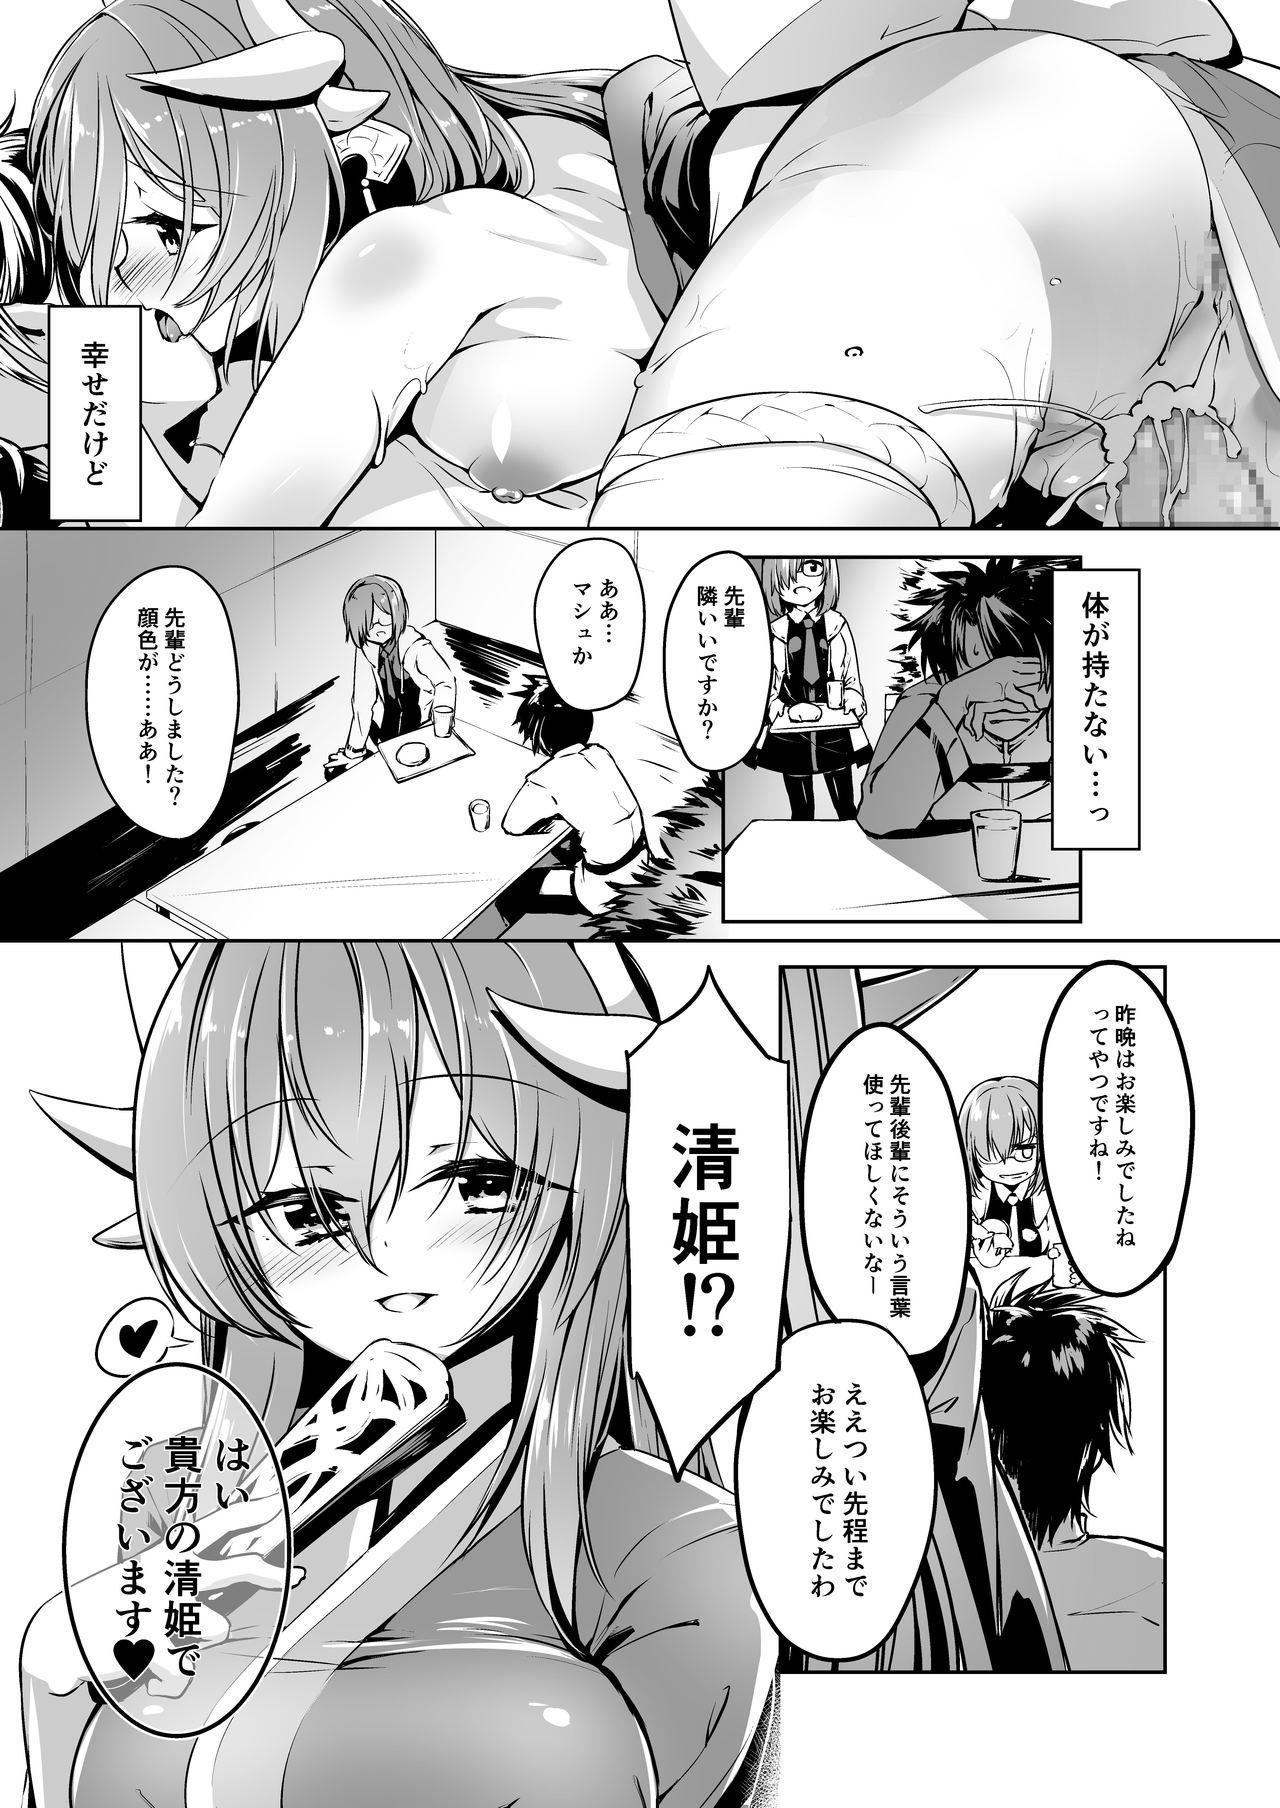 Lips Kiyohime Lovers vol. 02 - Fate grand order Gym - Page 6